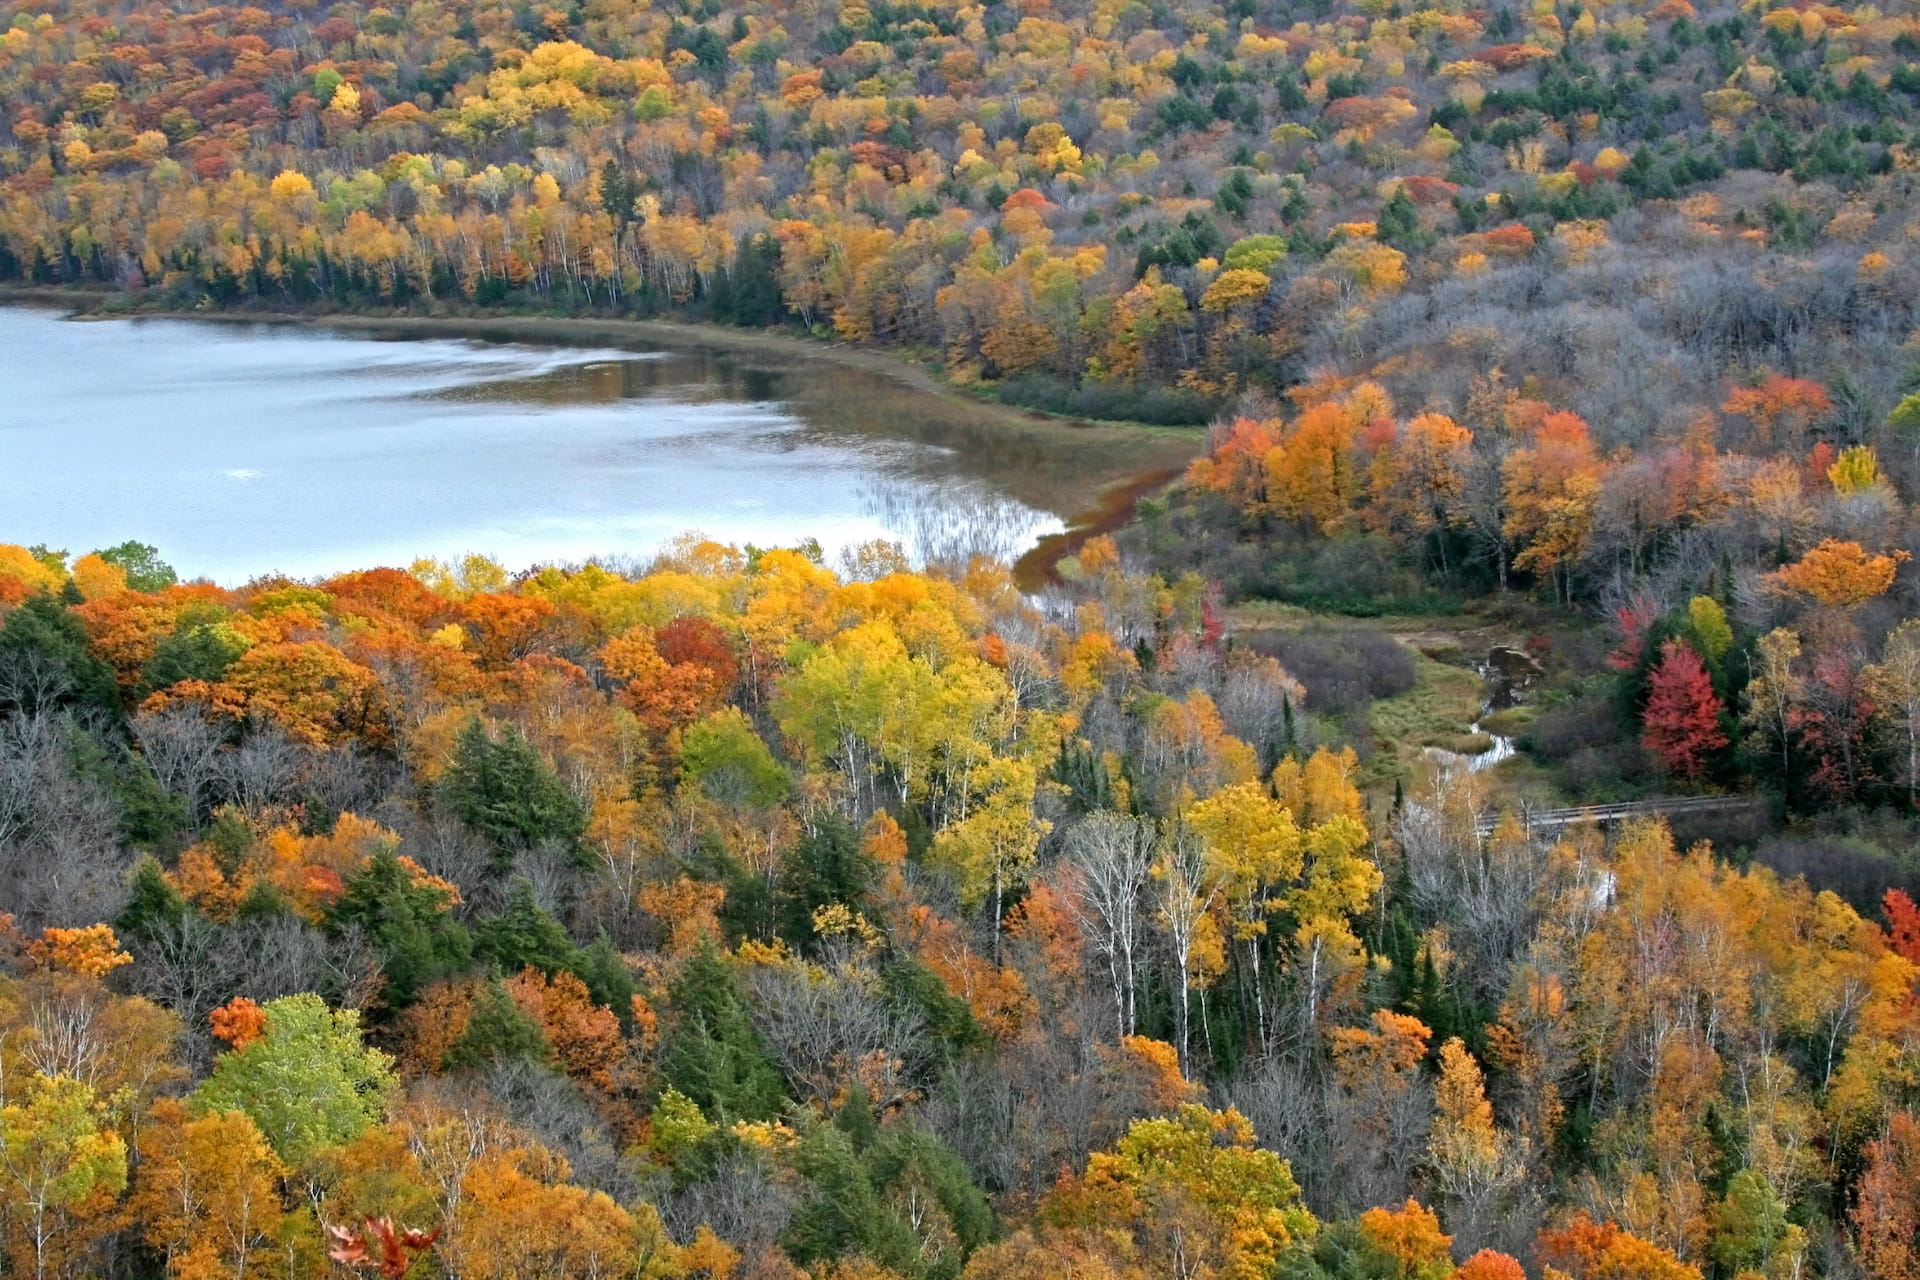 Porcupine Hills Provincial Park in the fall. A lake surrounded by colourful autumn trees.